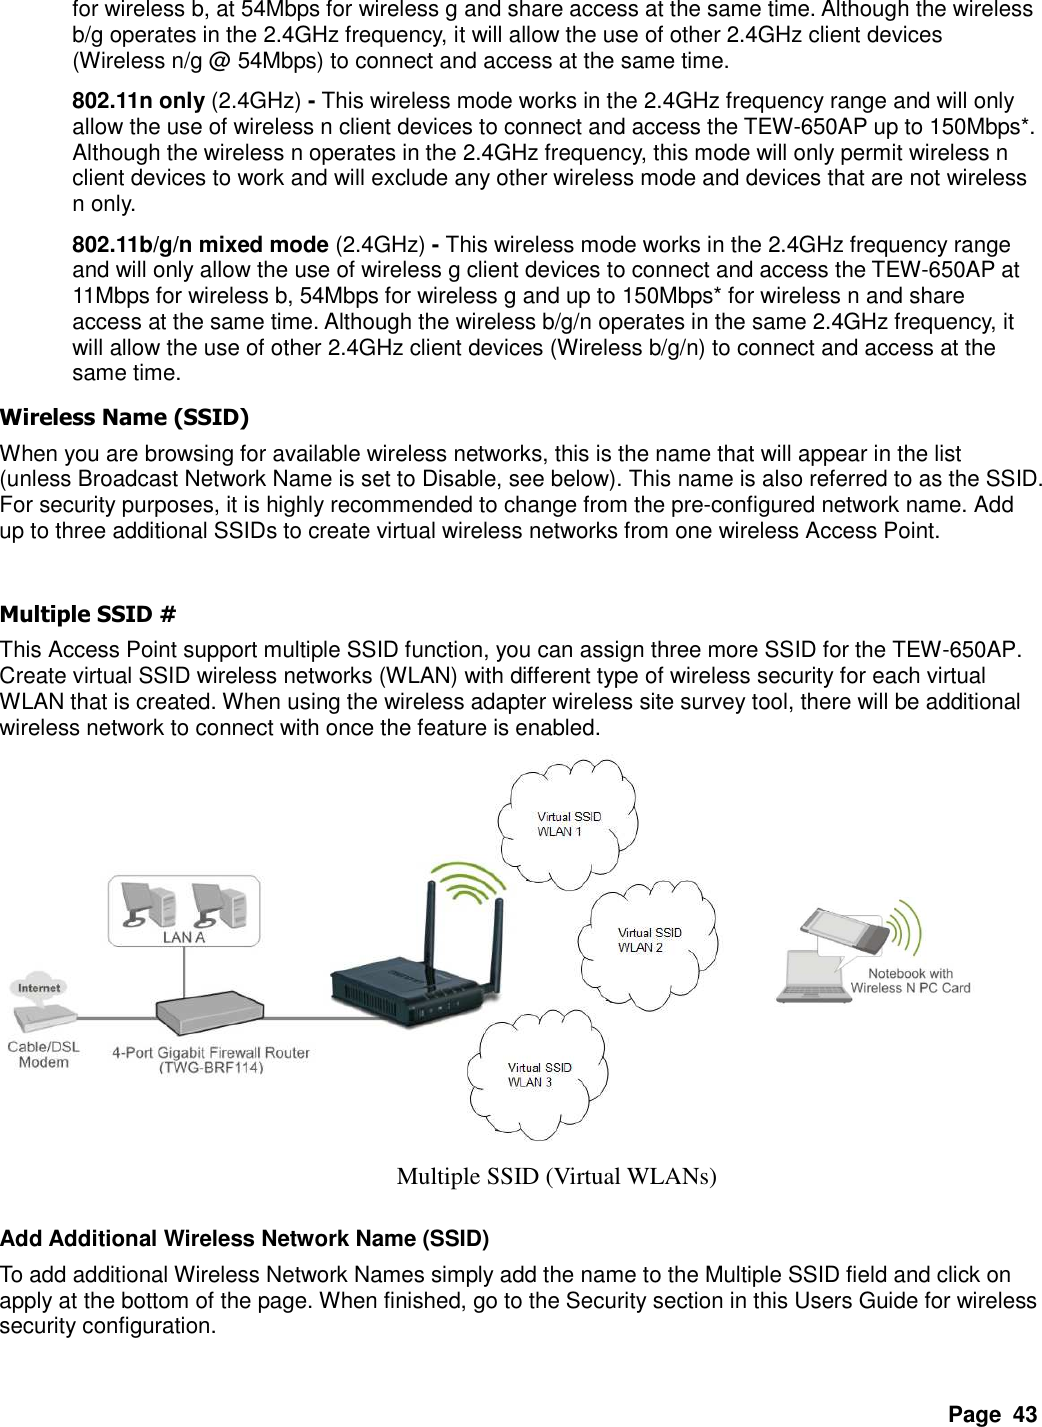 Page  43 for wireless b, at 54Mbps for wireless g and share access at the same time. Although the wireless b/g operates in the 2.4GHz frequency, it will allow the use of other 2.4GHz client devices (Wireless n/g @ 54Mbps) to connect and access at the same time. 802.11n only (2.4GHz) - This wireless mode works in the 2.4GHz frequency range and will only allow the use of wireless n client devices to connect and access the TEW-650AP up to 150Mbps*. Although the wireless n operates in the 2.4GHz frequency, this mode will only permit wireless n client devices to work and will exclude any other wireless mode and devices that are not wireless n only. 802.11b/g/n mixed mode (2.4GHz) - This wireless mode works in the 2.4GHz frequency range and will only allow the use of wireless g client devices to connect and access the TEW-650AP at 11Mbps for wireless b, 54Mbps for wireless g and up to 150Mbps* for wireless n and share access at the same time. Although the wireless b/g/n operates in the same 2.4GHz frequency, it will allow the use of other 2.4GHz client devices (Wireless b/g/n) to connect and access at the same time. Wireless Name (SSID) When you are browsing for available wireless networks, this is the name that will appear in the list (unless Broadcast Network Name is set to Disable, see below). This name is also referred to as the SSID. For security purposes, it is highly recommended to change from the pre-configured network name. Add up to three additional SSIDs to create virtual wireless networks from one wireless Access Point.  Multiple SSID # This Access Point support multiple SSID function, you can assign three more SSID for the TEW-650AP. Create virtual SSID wireless networks (WLAN) with different type of wireless security for each virtual WLAN that is created. When using the wireless adapter wireless site survey tool, there will be additional wireless network to connect with once the feature is enabled.     Add Additional Wireless Network Name (SSID) To add additional Wireless Network Names simply add the name to the Multiple SSID field and click on apply at the bottom of the page. When finished, go to the Security section in this Users Guide for wireless security configuration.  Multiple SSID (Virtual WLANs) 